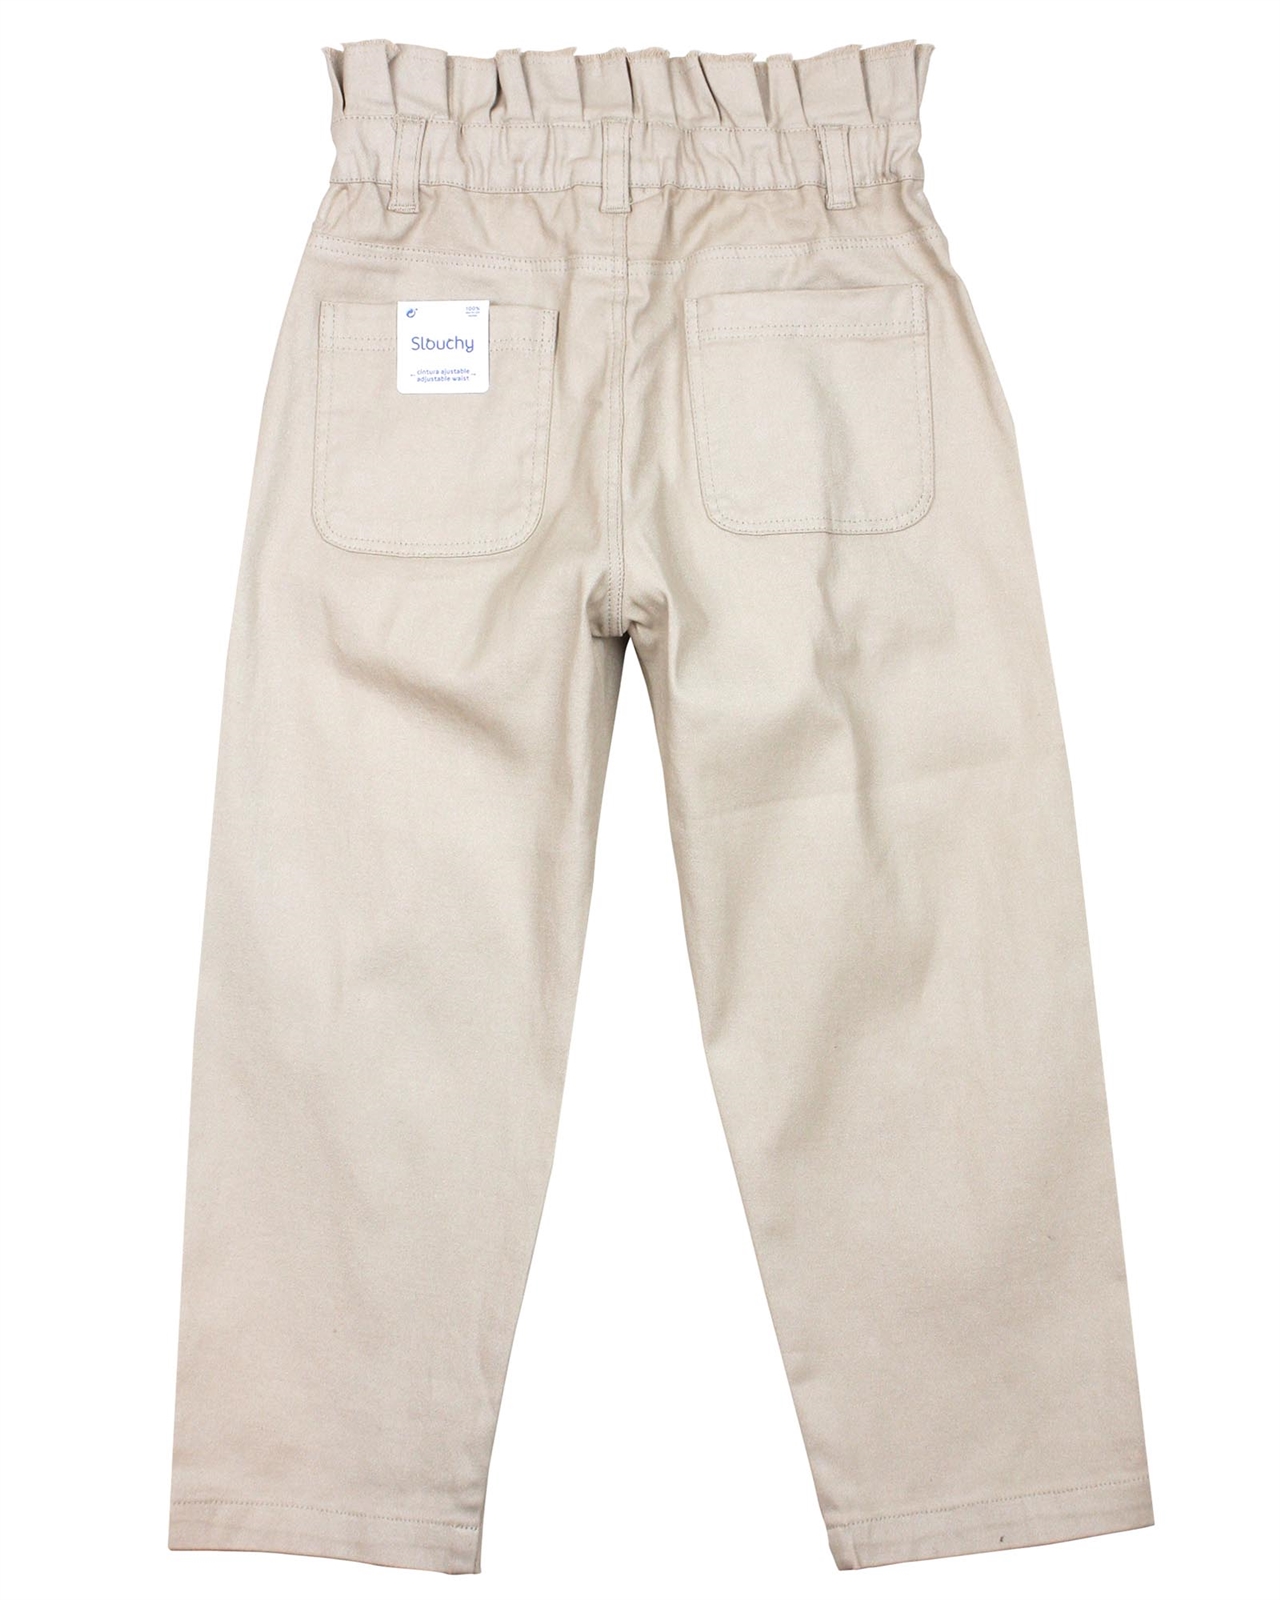 Mayoral Girl's Twill Slouchy Pants - Mayoral - Mayoral Spring/Summer 2021